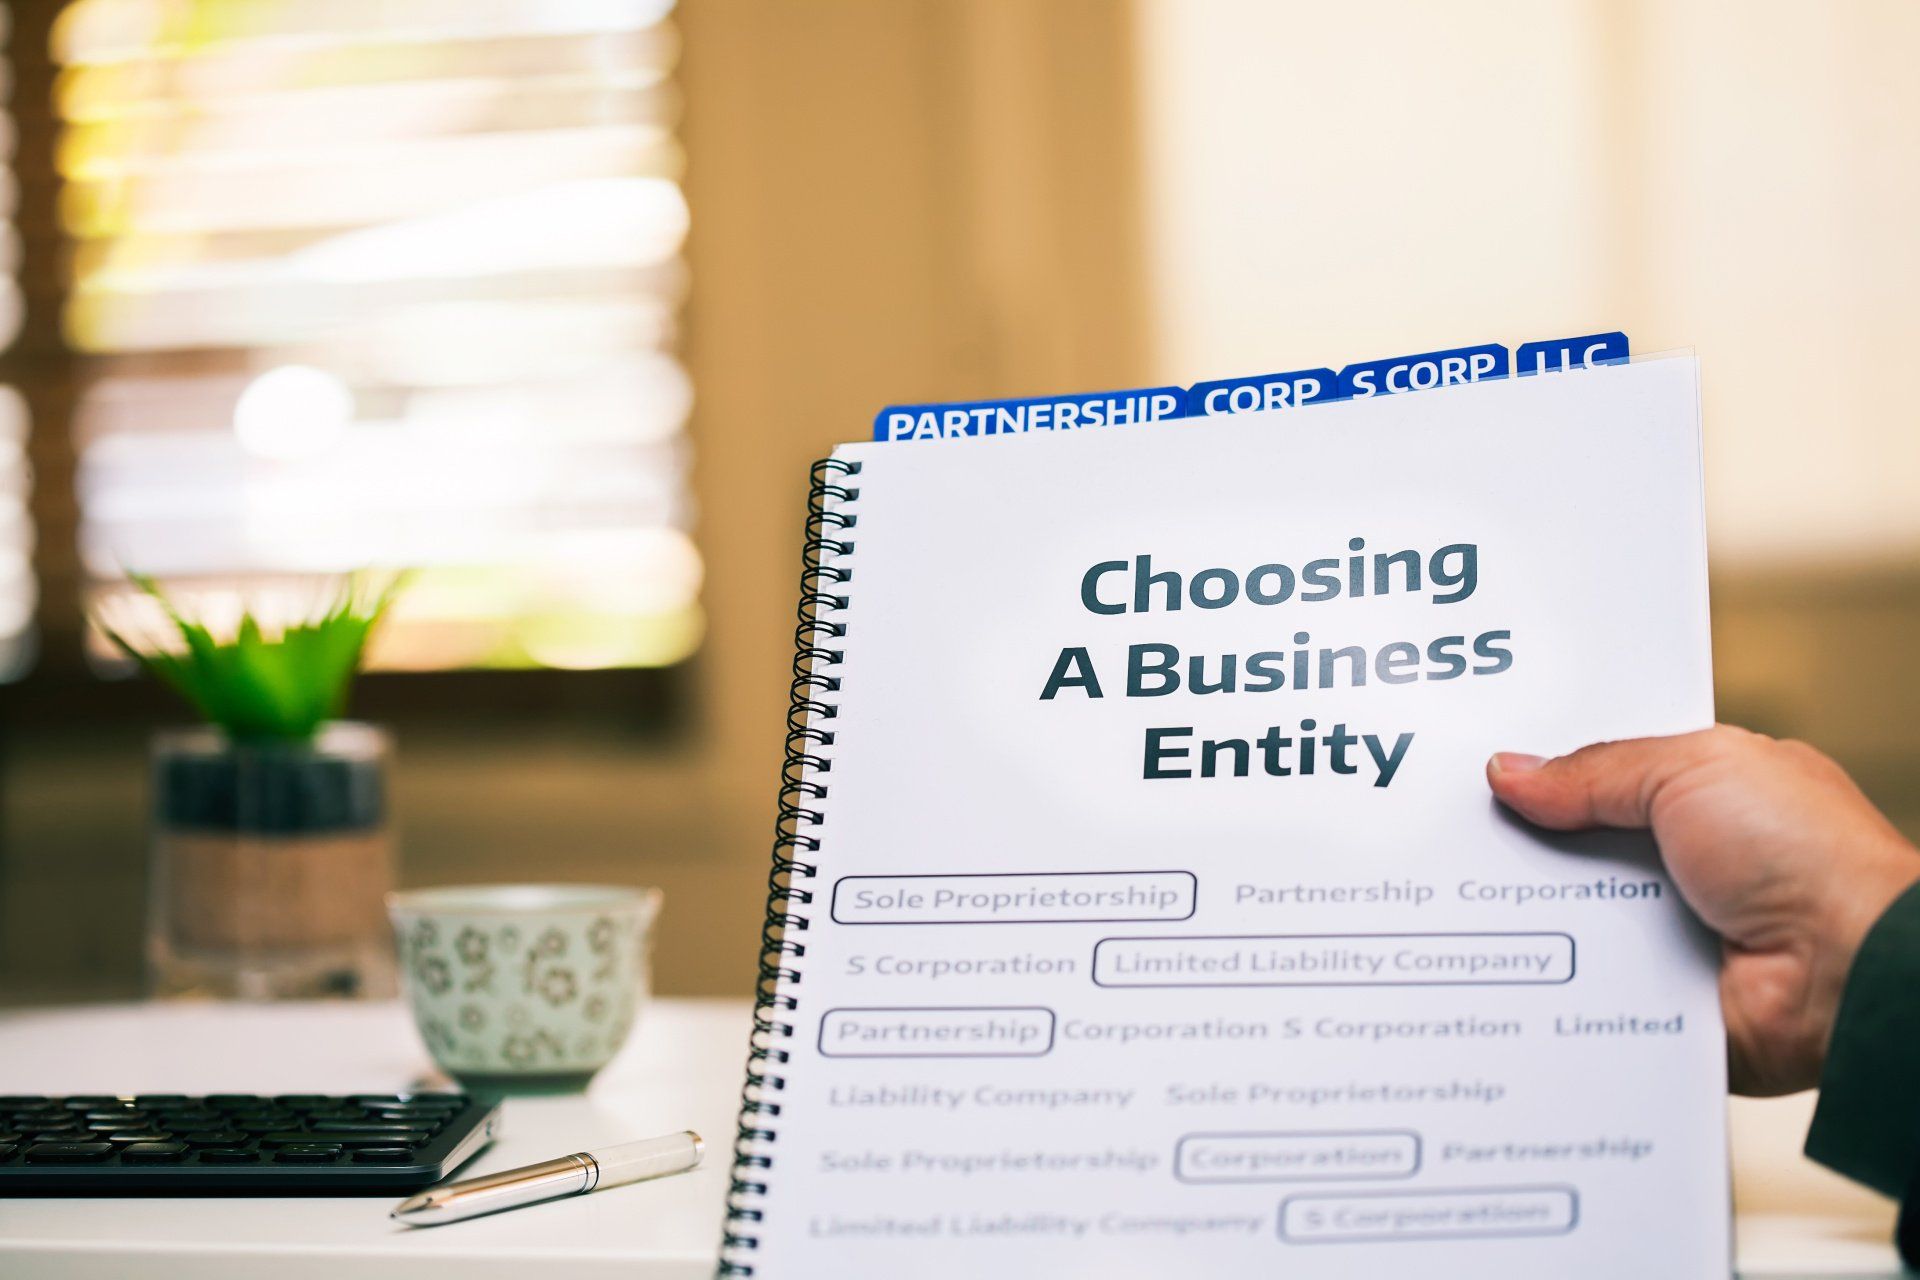 Choosing the right business entity